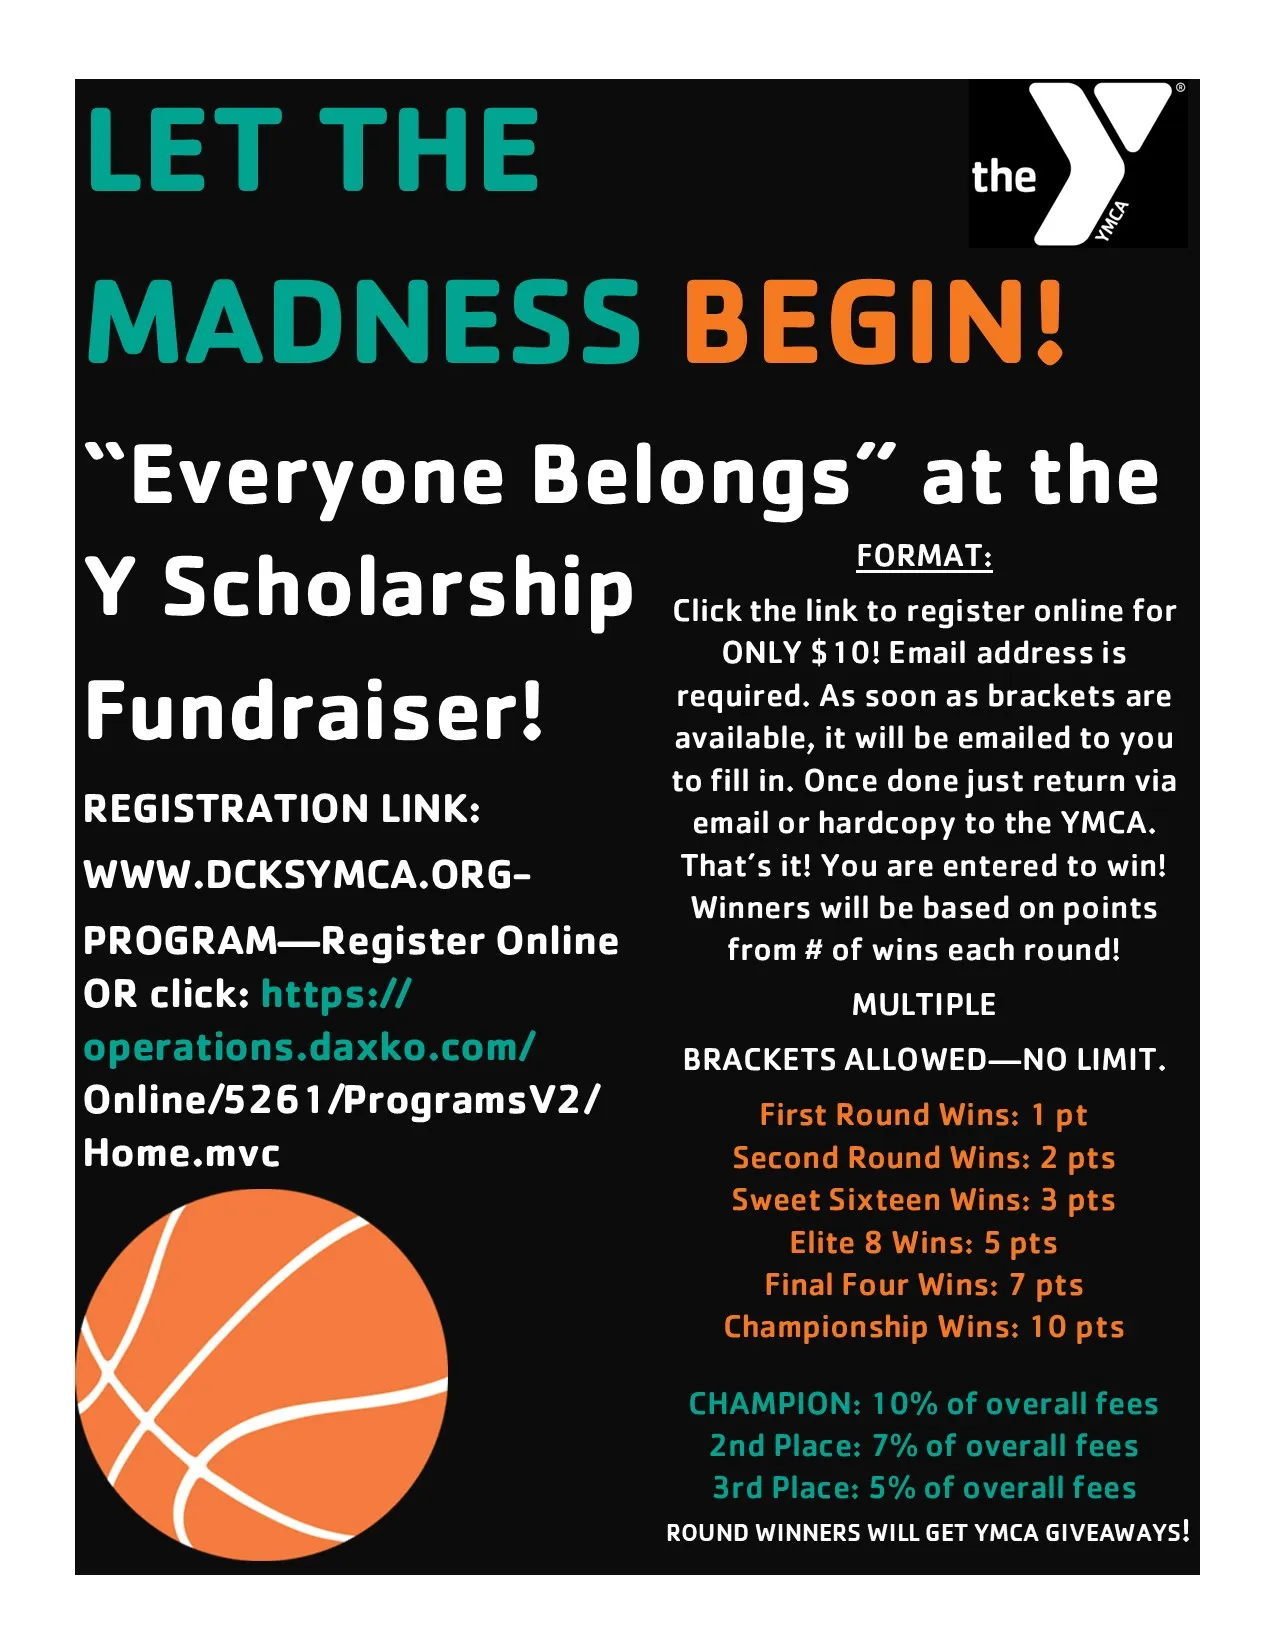 March madness flyer